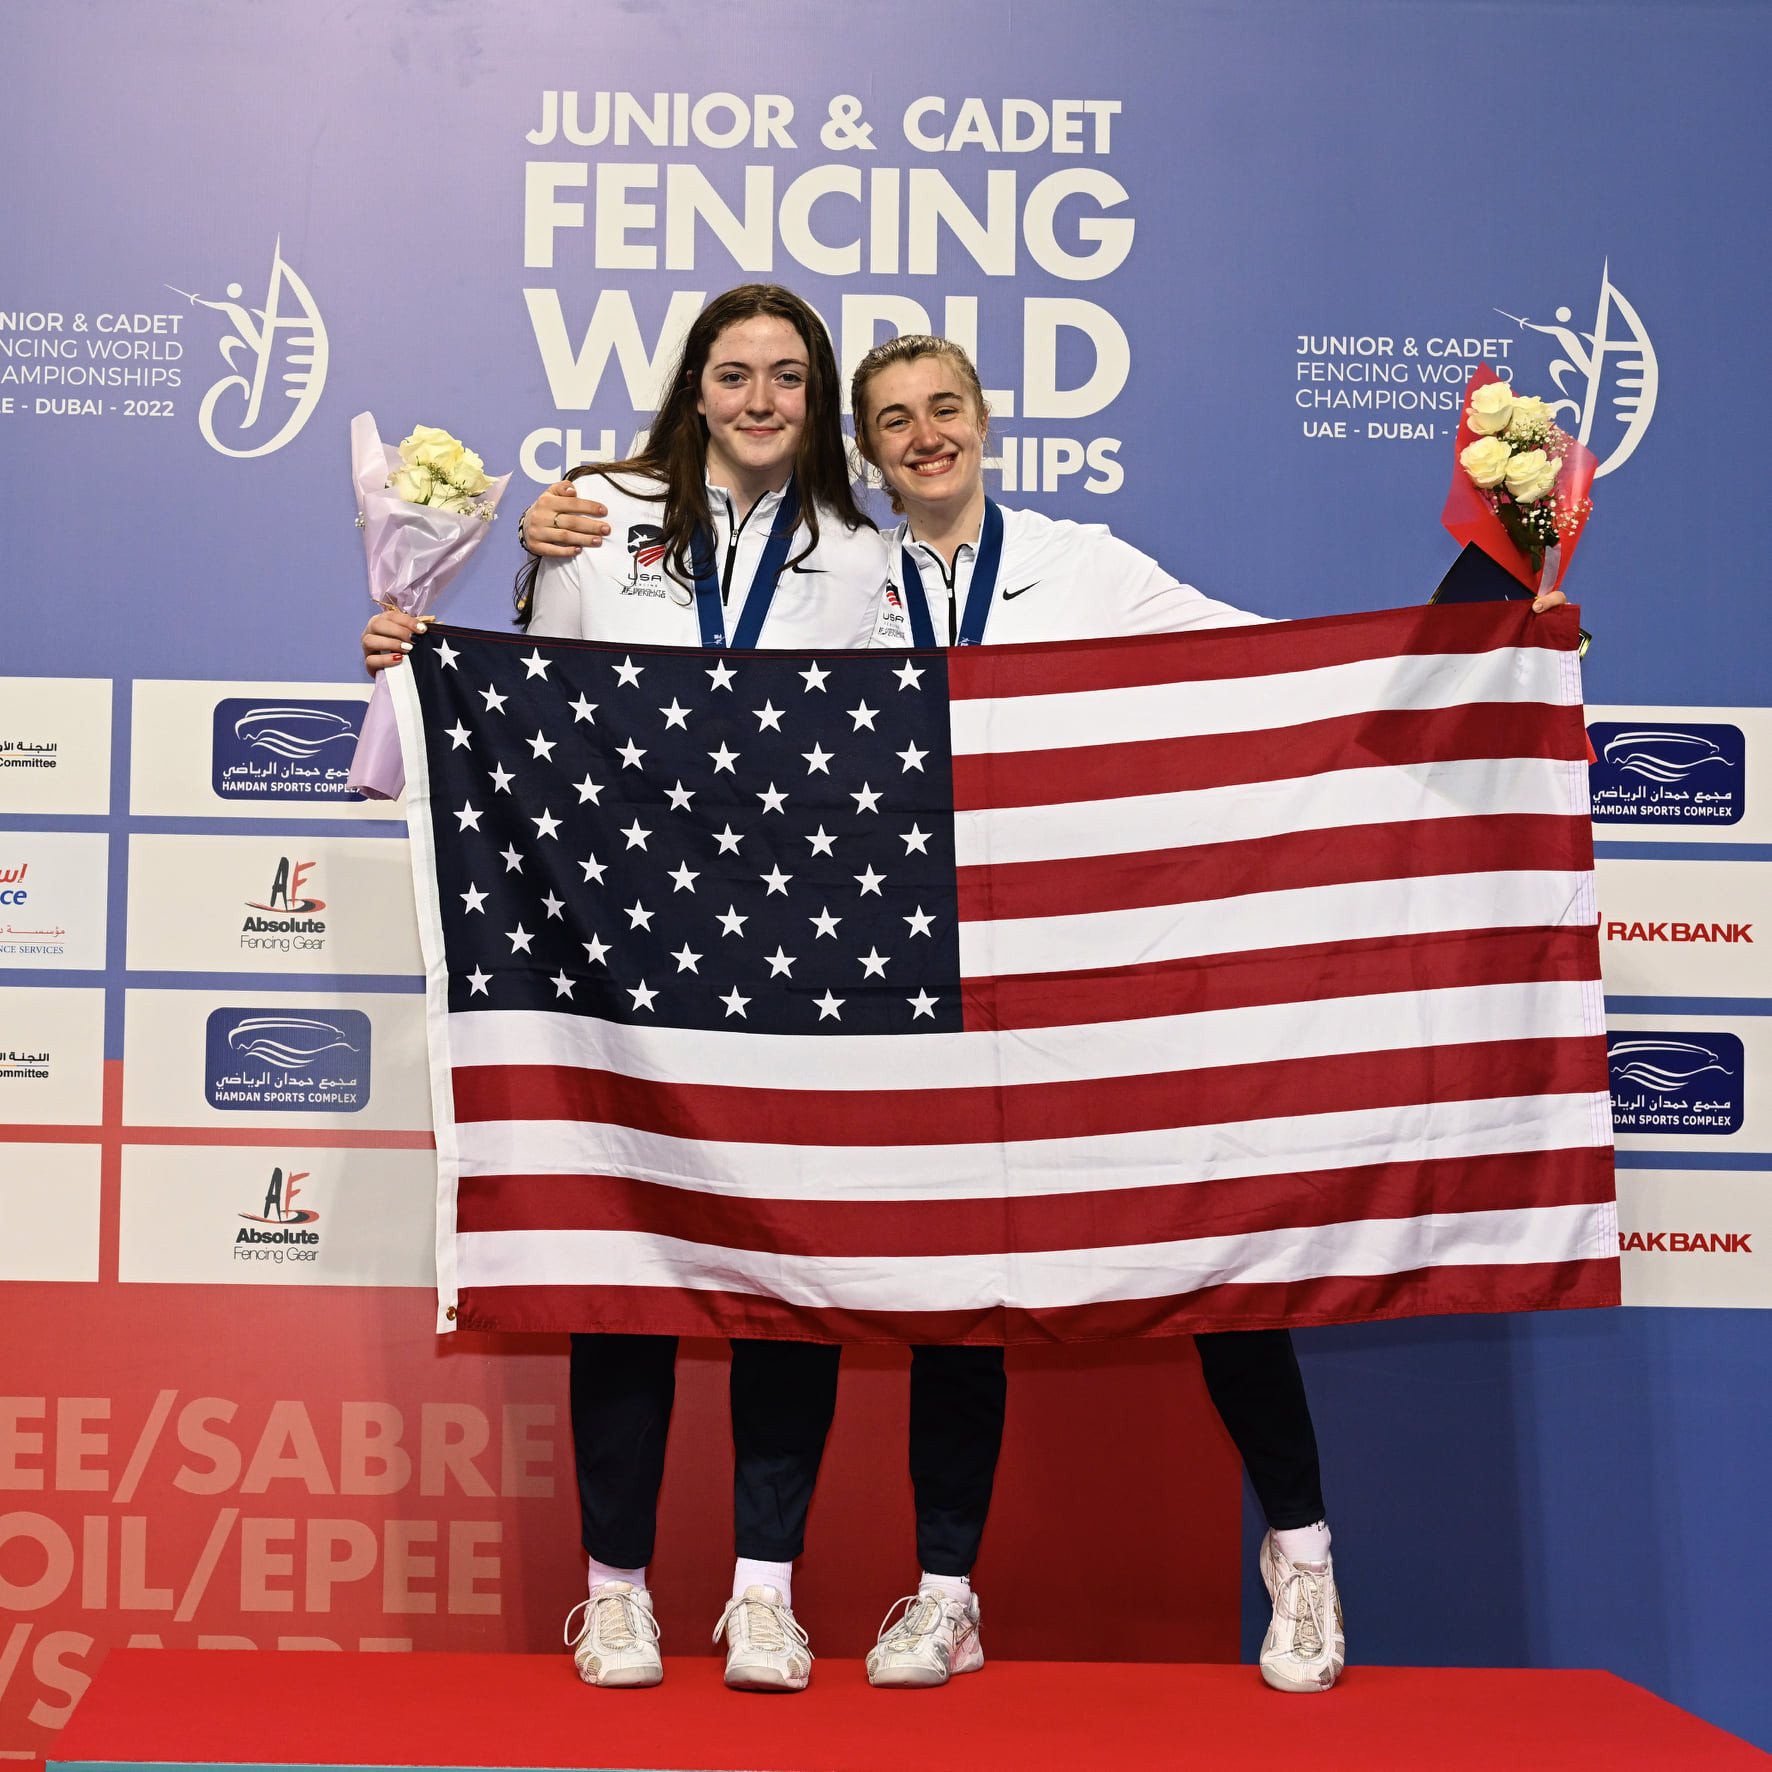 Skarbonkiewicz wins second title at Junior and Cadet Fencing World